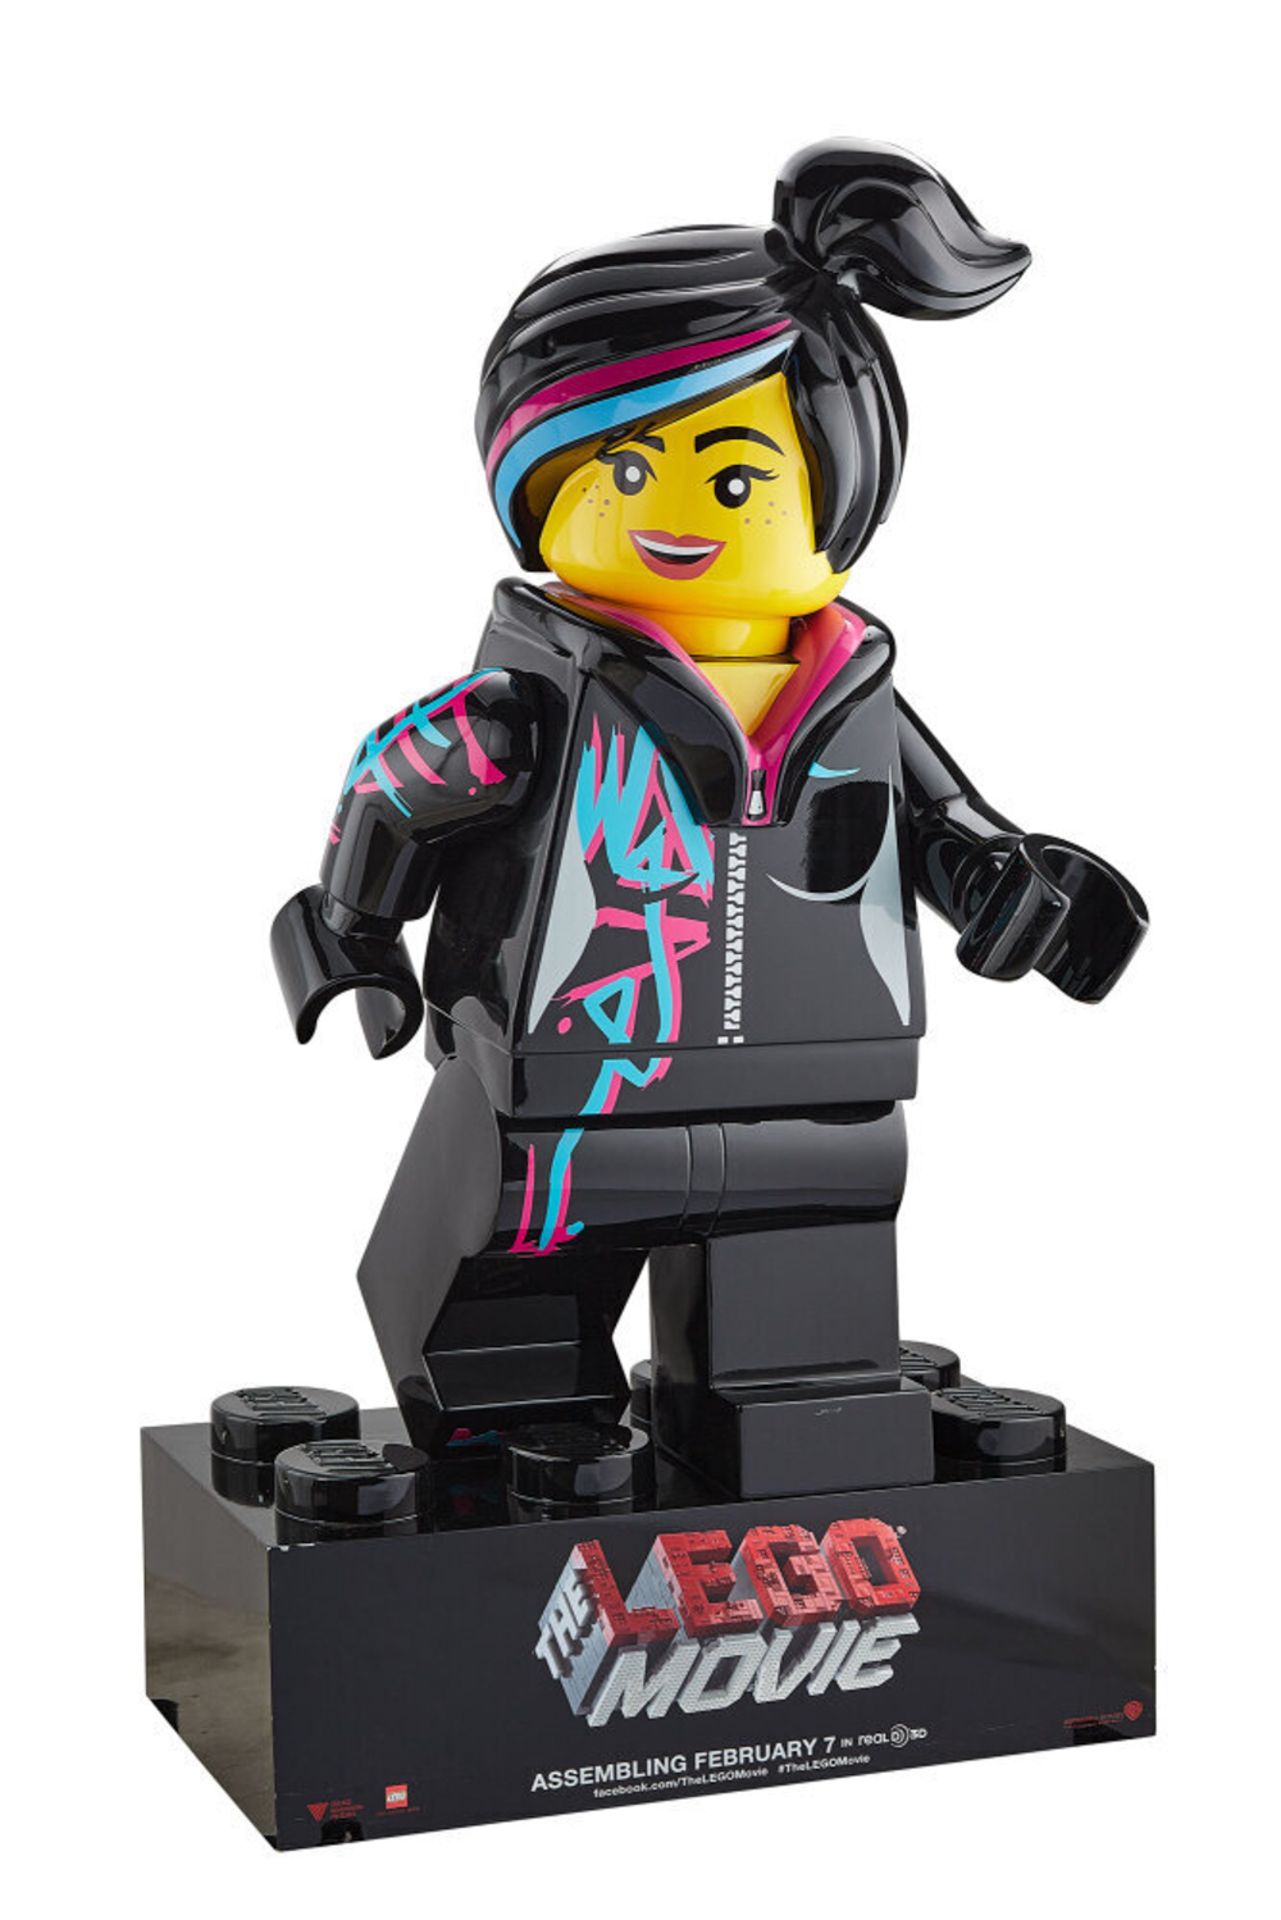 THE LEGO MOVIE | "LUCY/ WYLDSTYLE" THEATRICAL RELEASE PREMIERE FIGURE